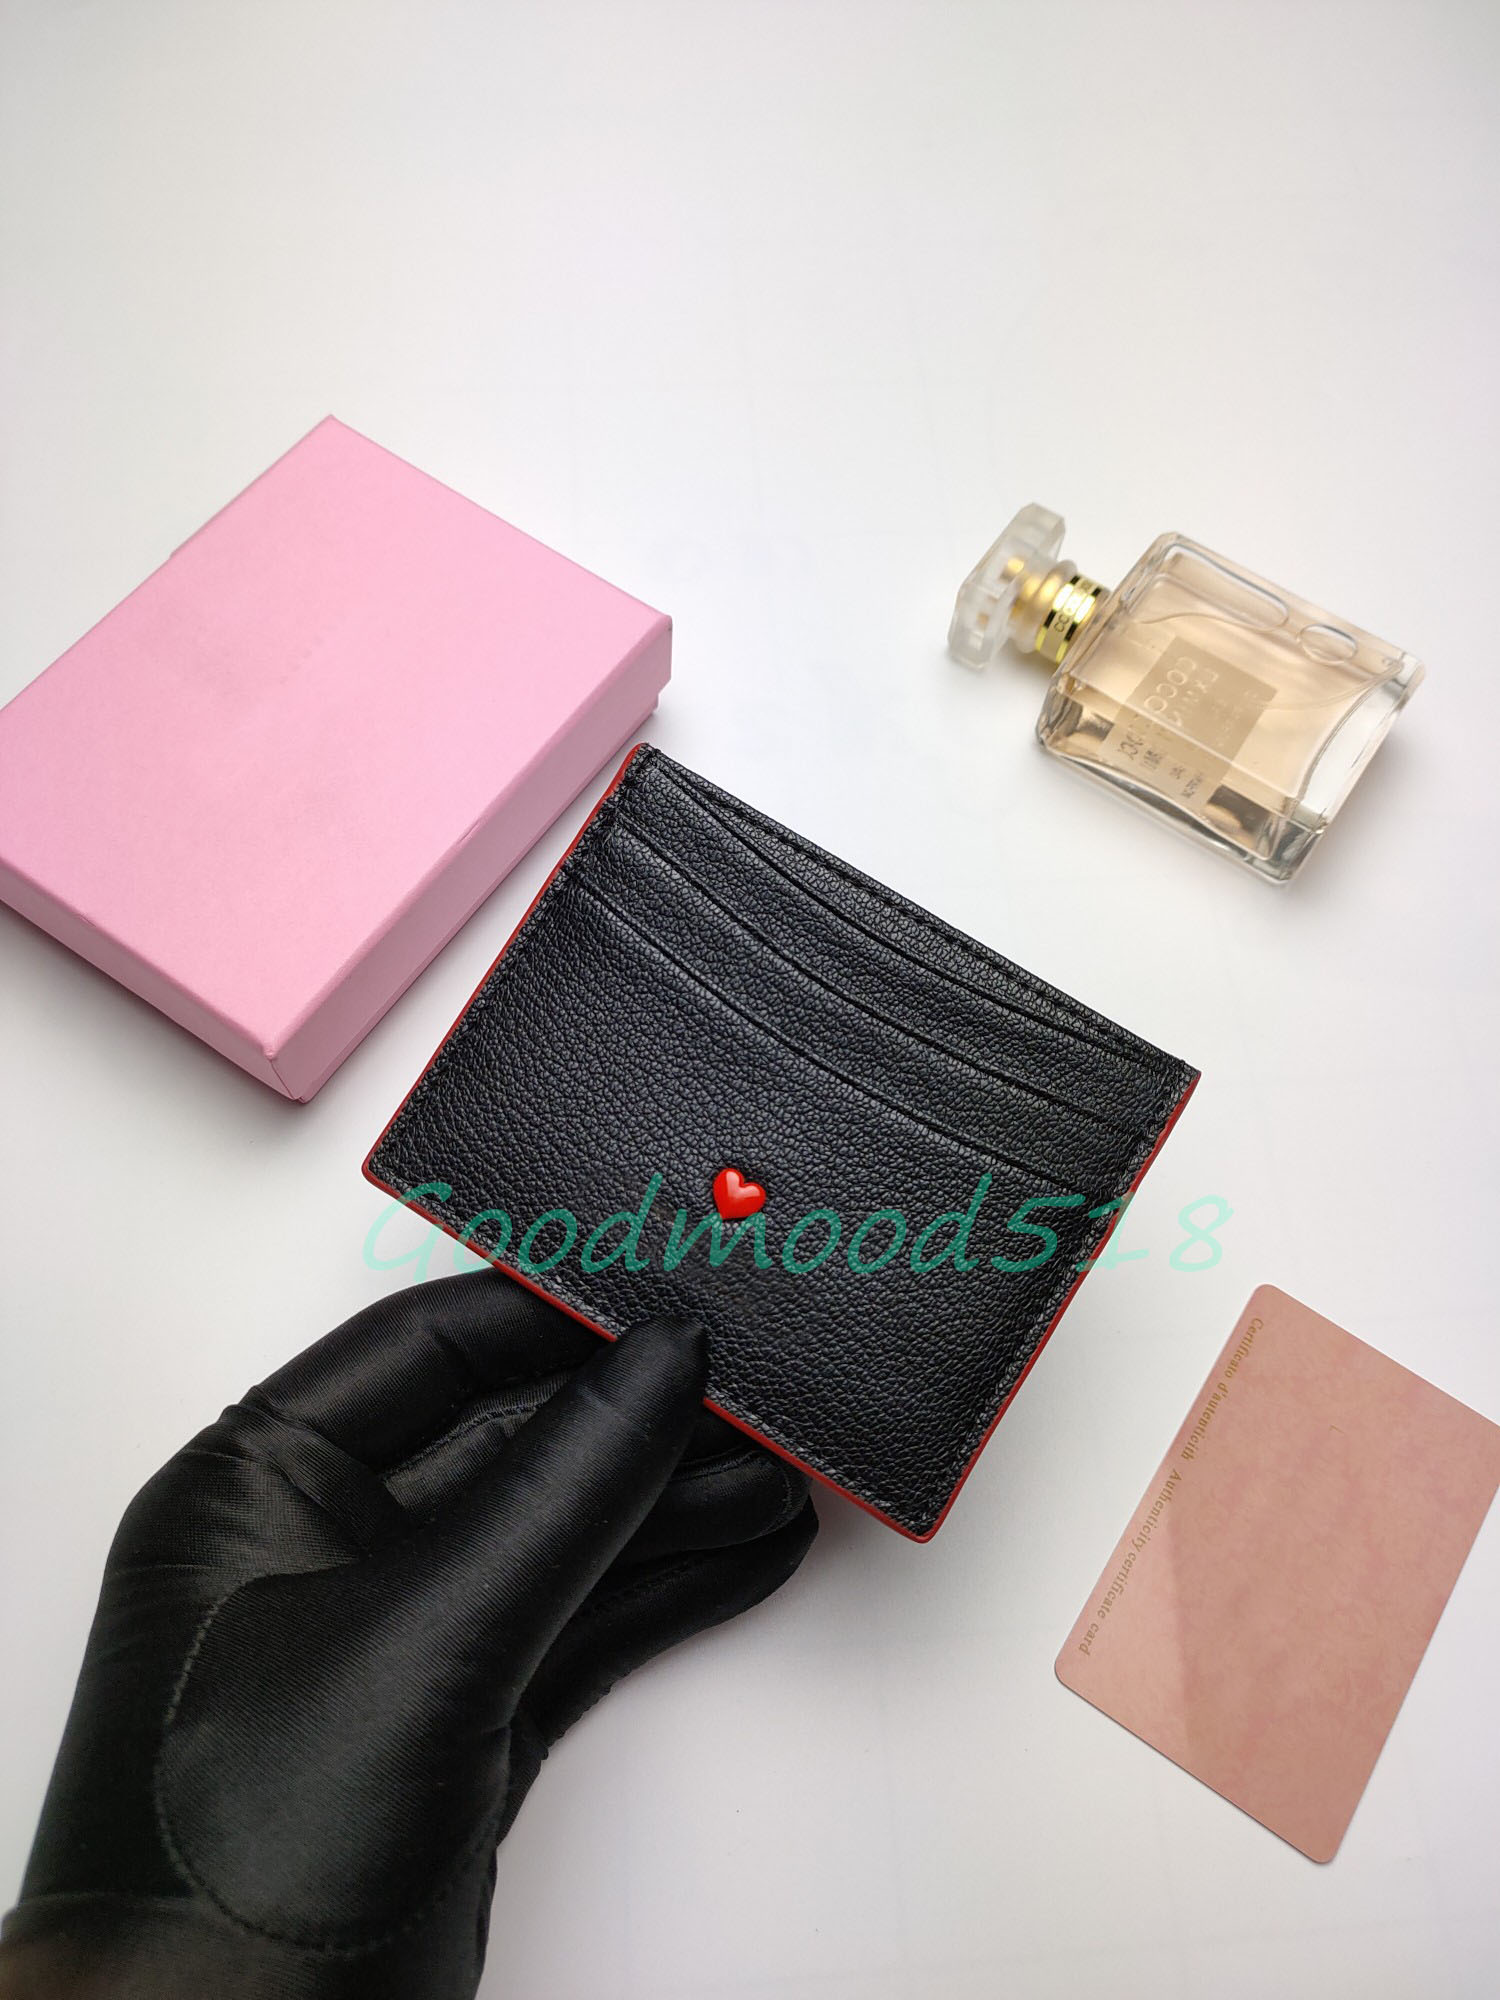 

2023 Popular fashion men women leather wallet multicolor card purse Card holder with box women pink purse serial number lady pink ID card wallet 11x7cm, Customize